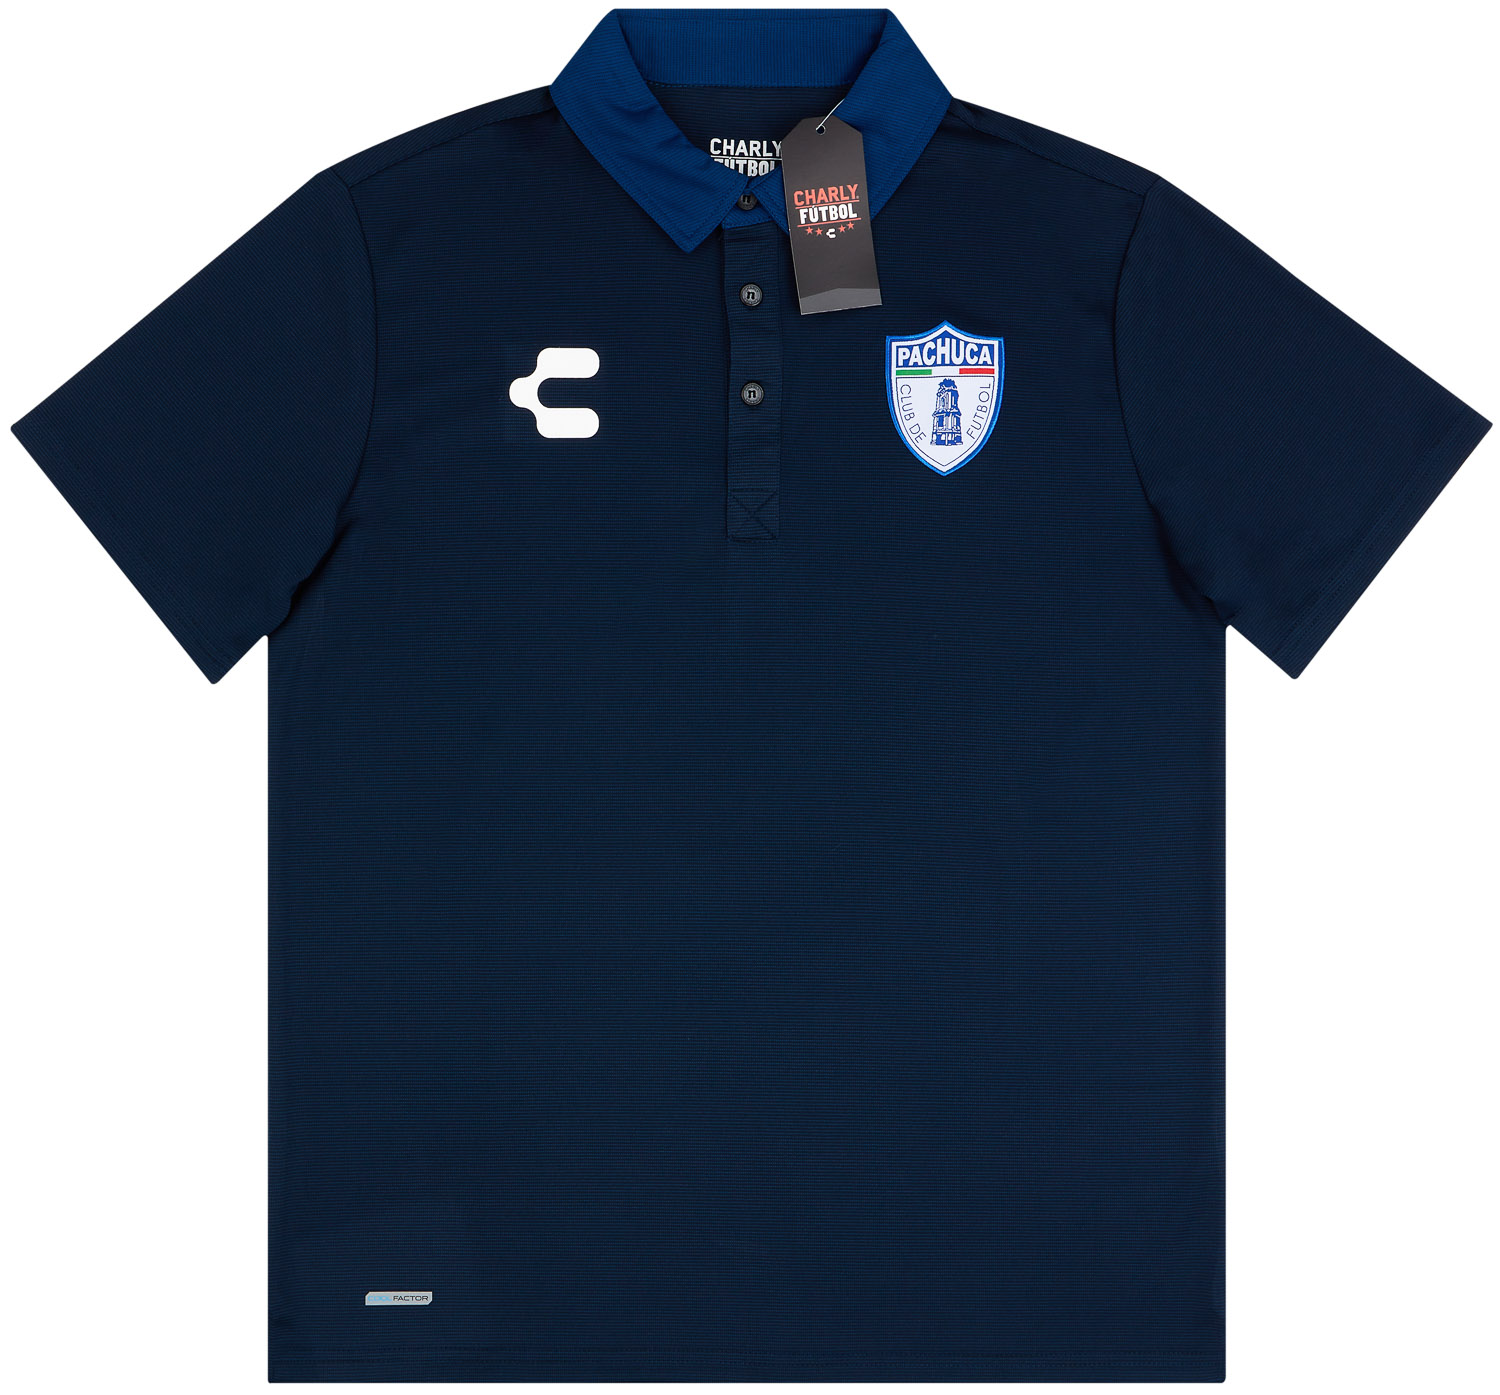 2018-19 Pachuca Charly Polo T-Shirt - NEW